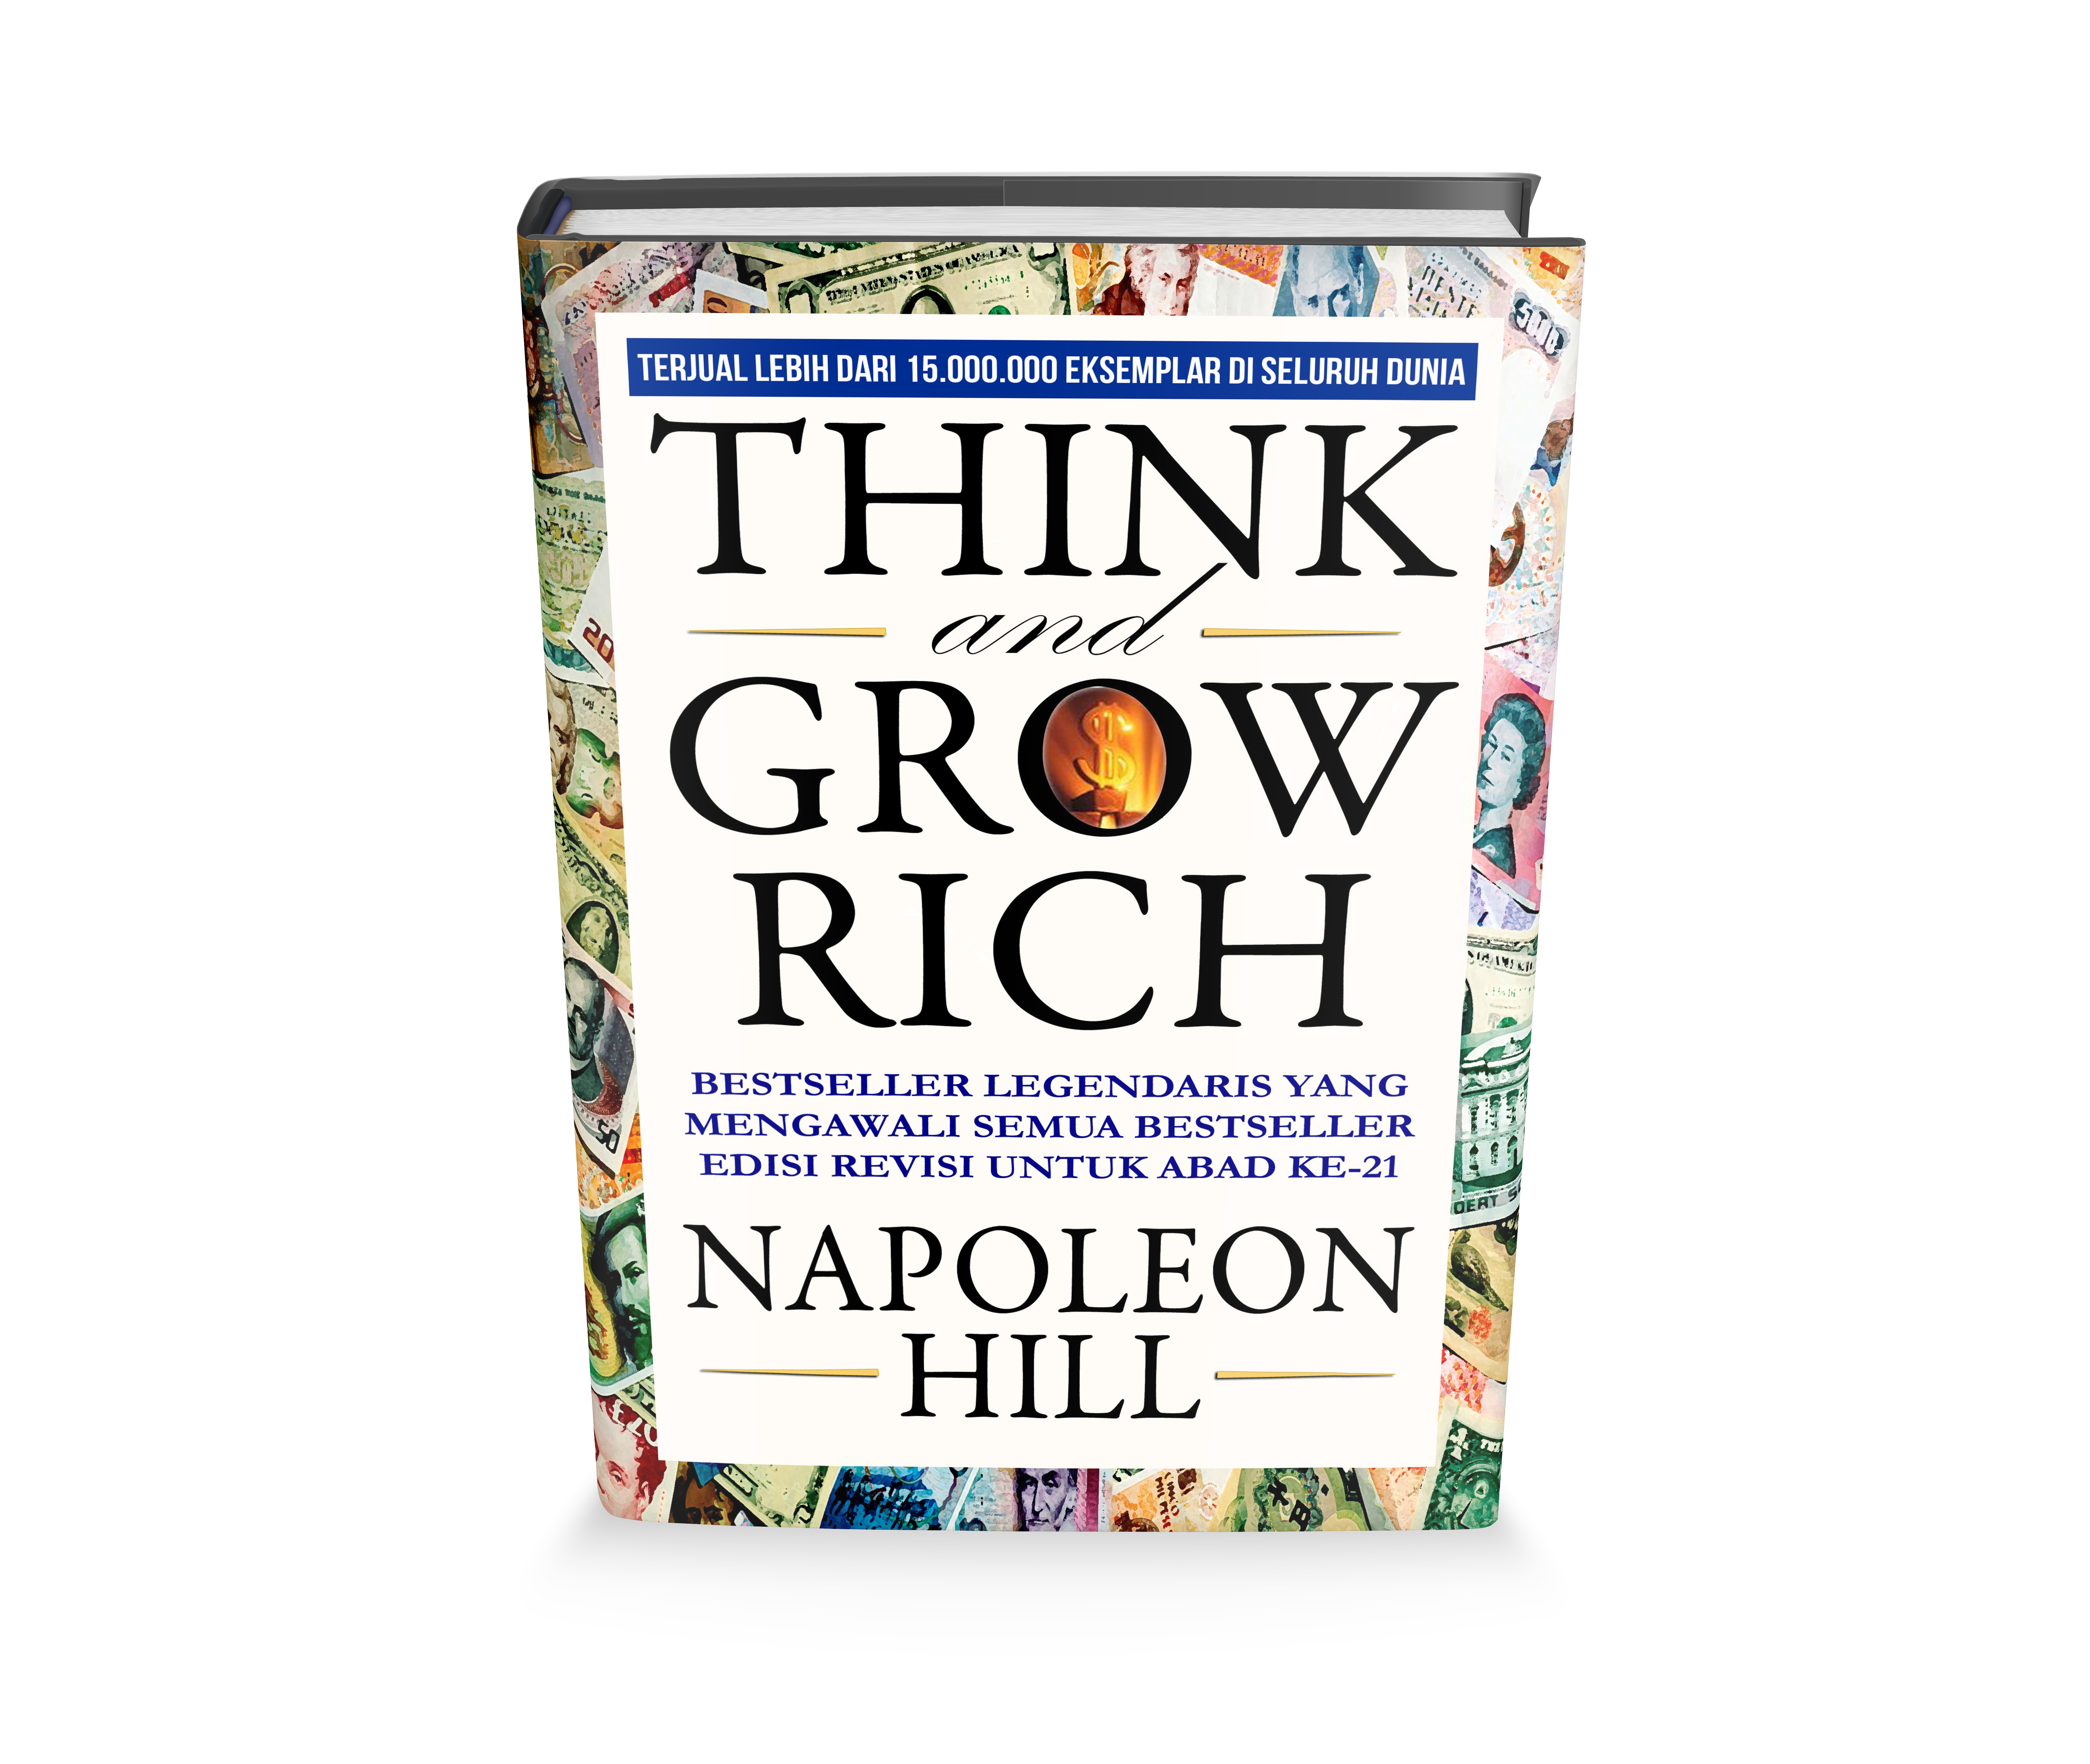 ebook think and grow rich bahasa indonesia pdf compressor